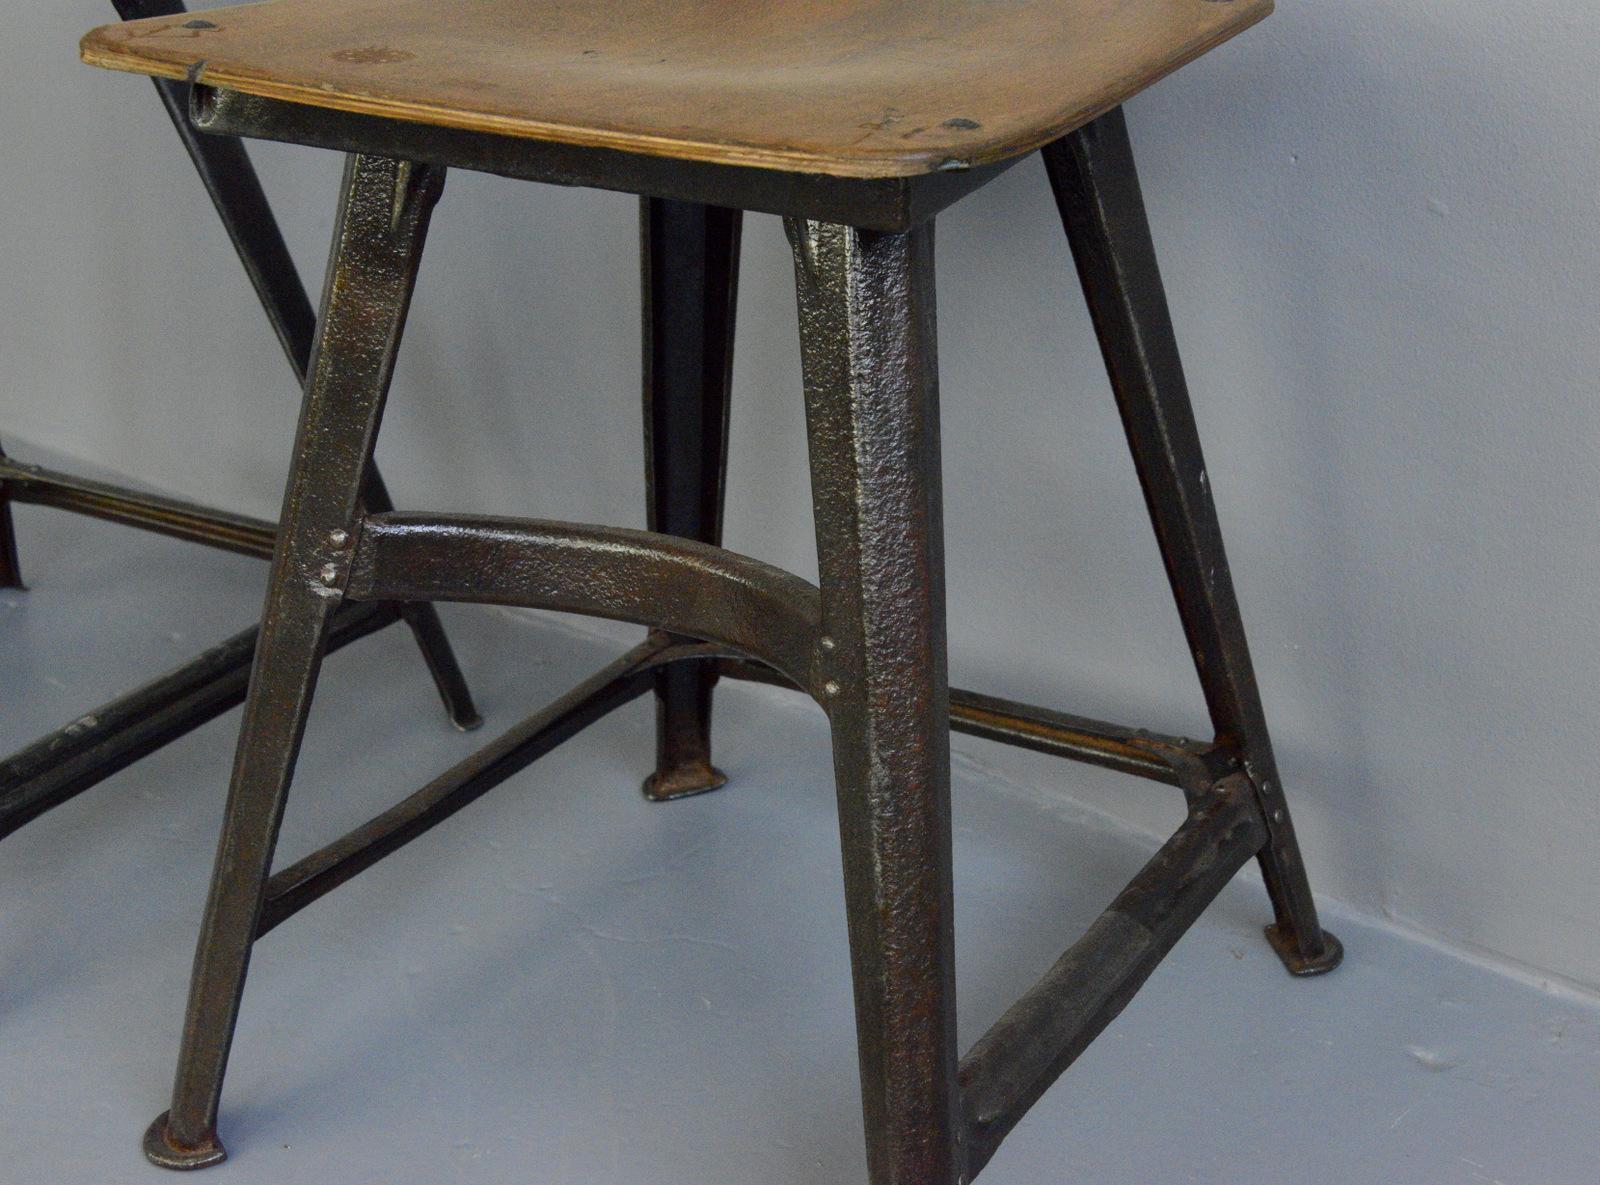 German Industrial Factory Chairs by Rowa, circa 1920s